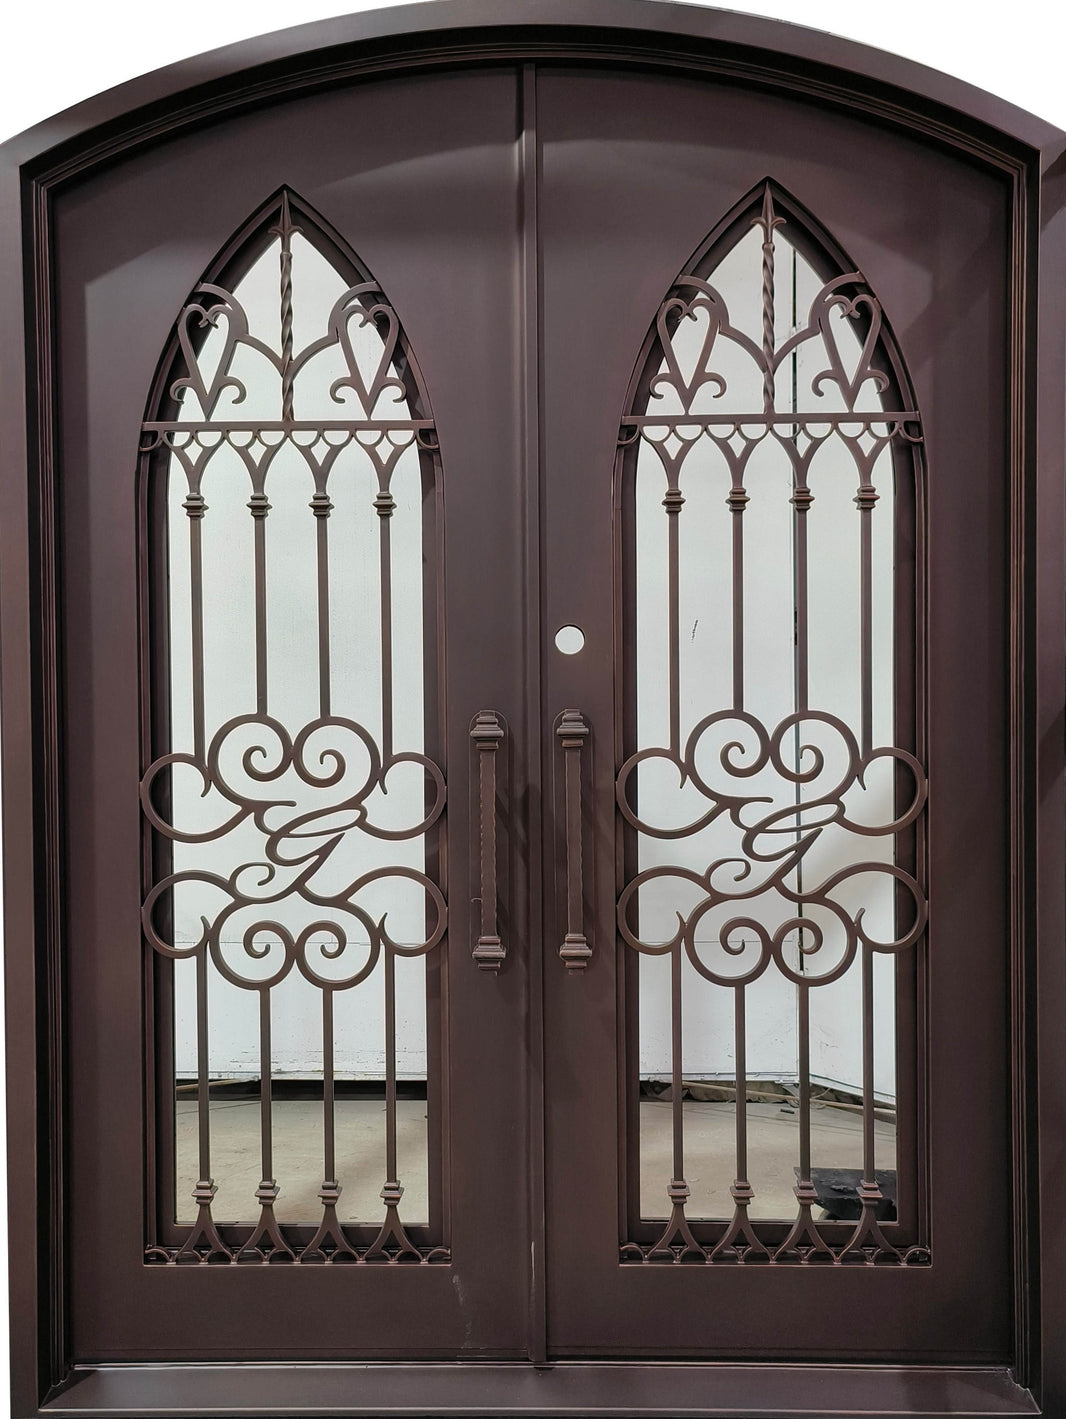 Wrought Iron Door | Arched Top With kickplate | Model # IWD 1054